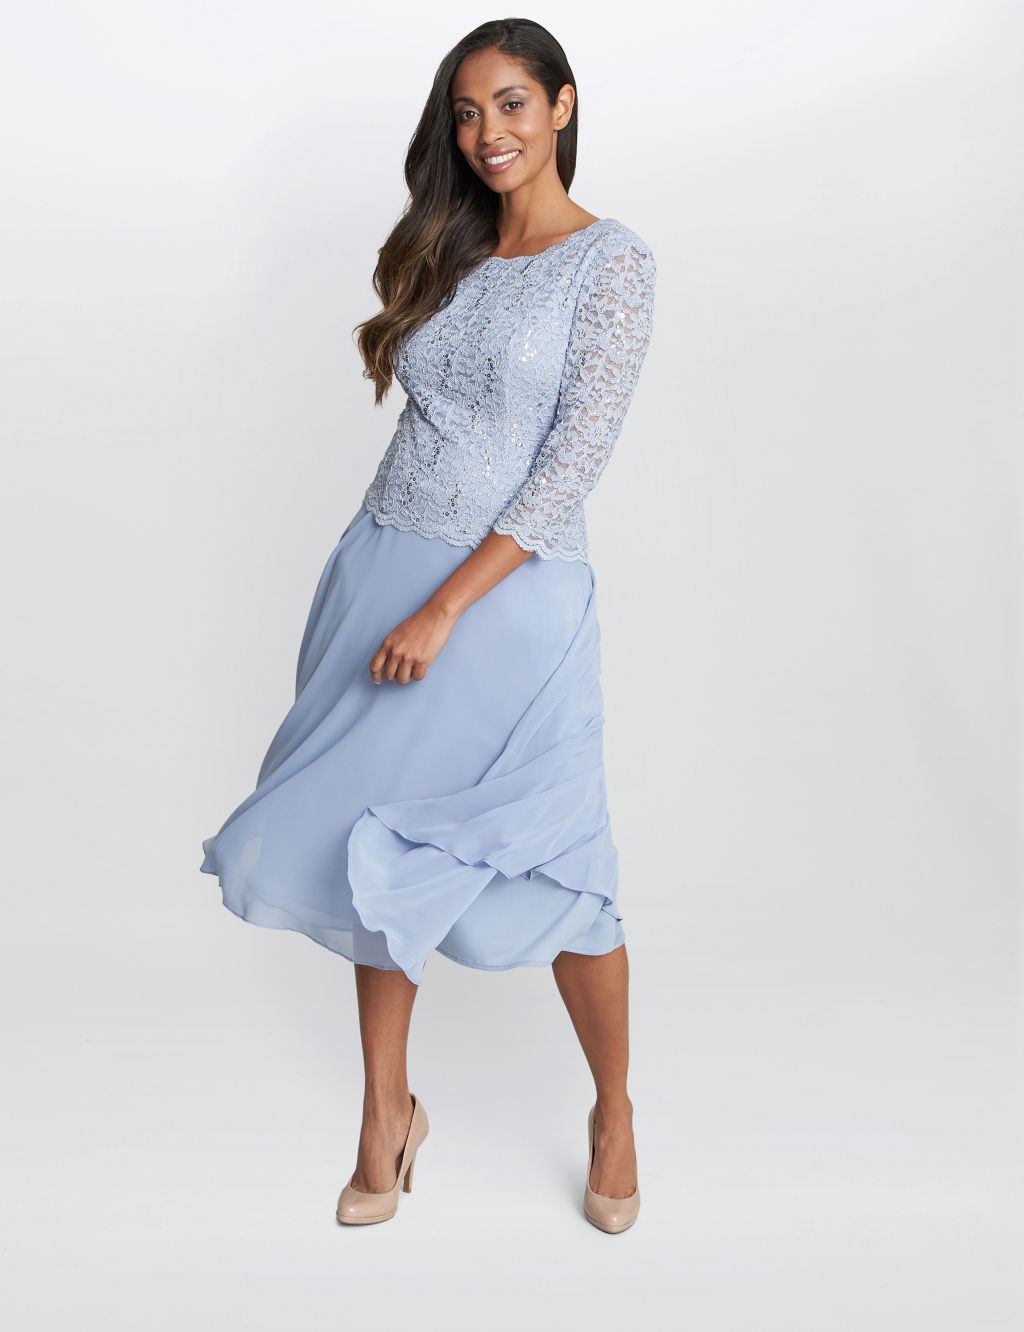 Embroidered Lace Round Neck Midi Swing Dress image 4